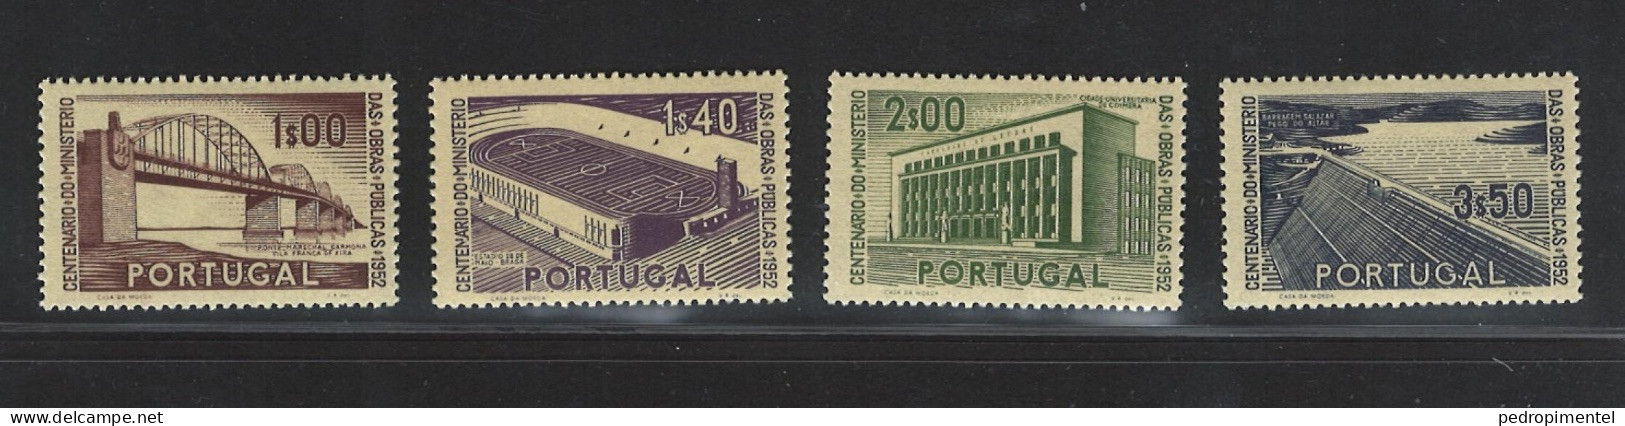 Portugal Stamps 1952 "Public Works" Condition MNH #755-758 - Nuovi